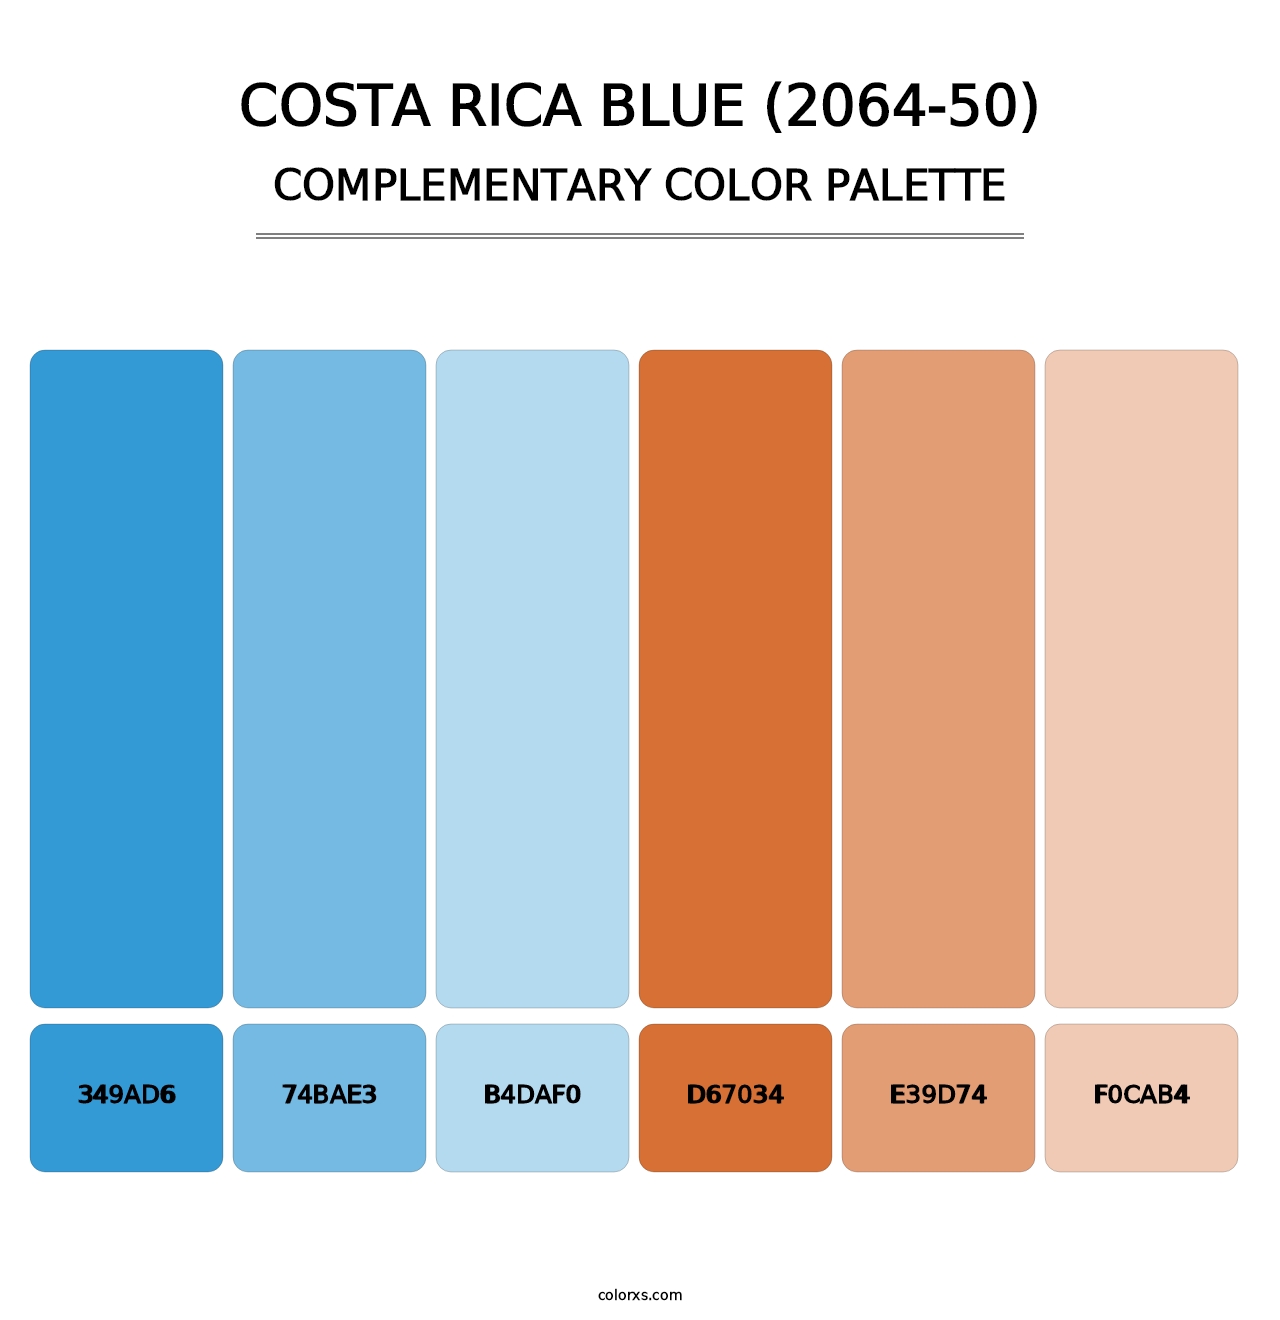 Costa Rica Blue (2064-50) - Complementary Color Palette